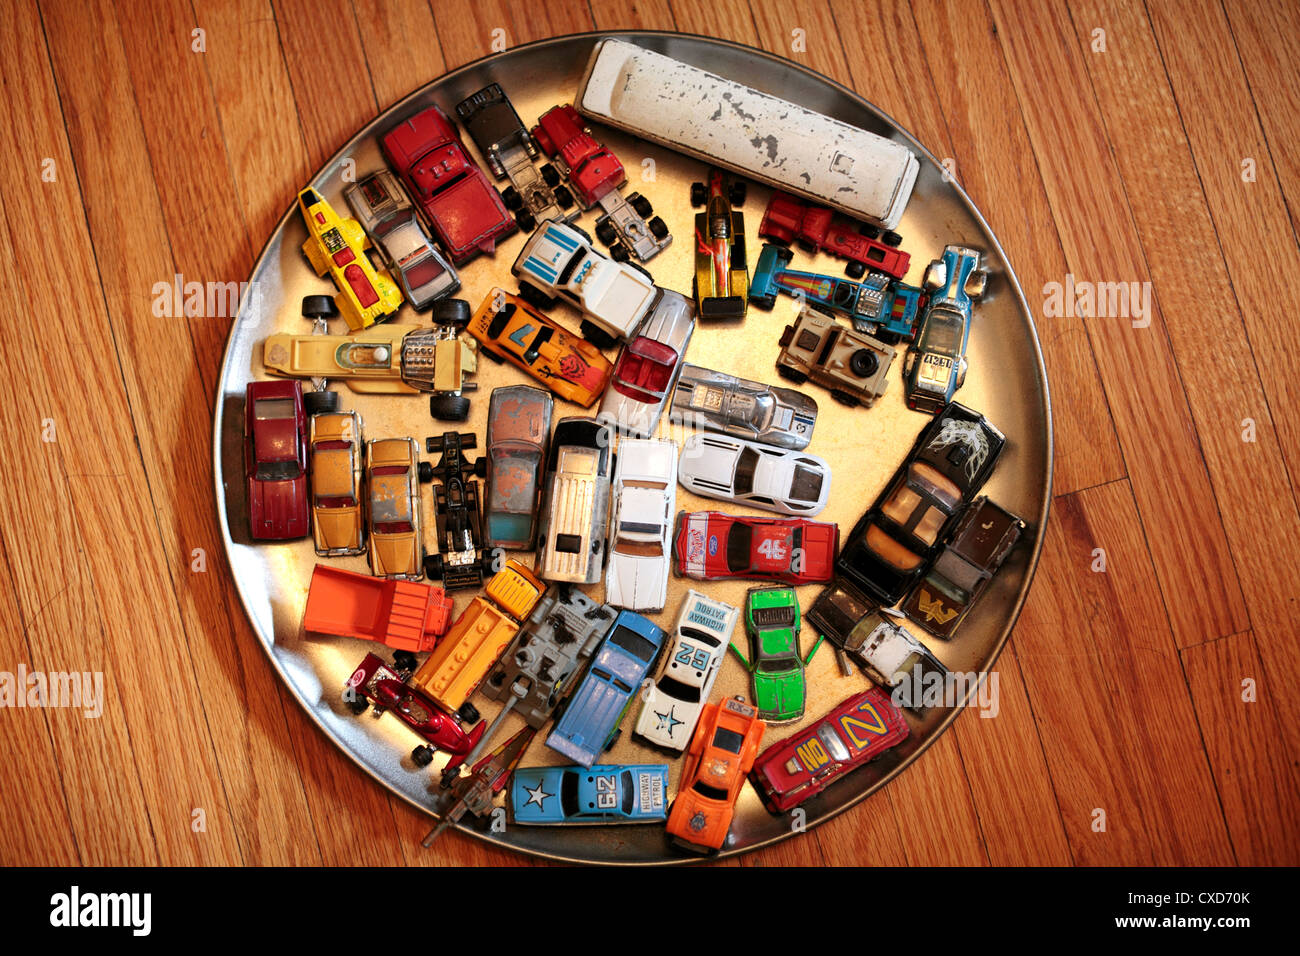 Collection of die-cast toy vehicles. Stock Photo